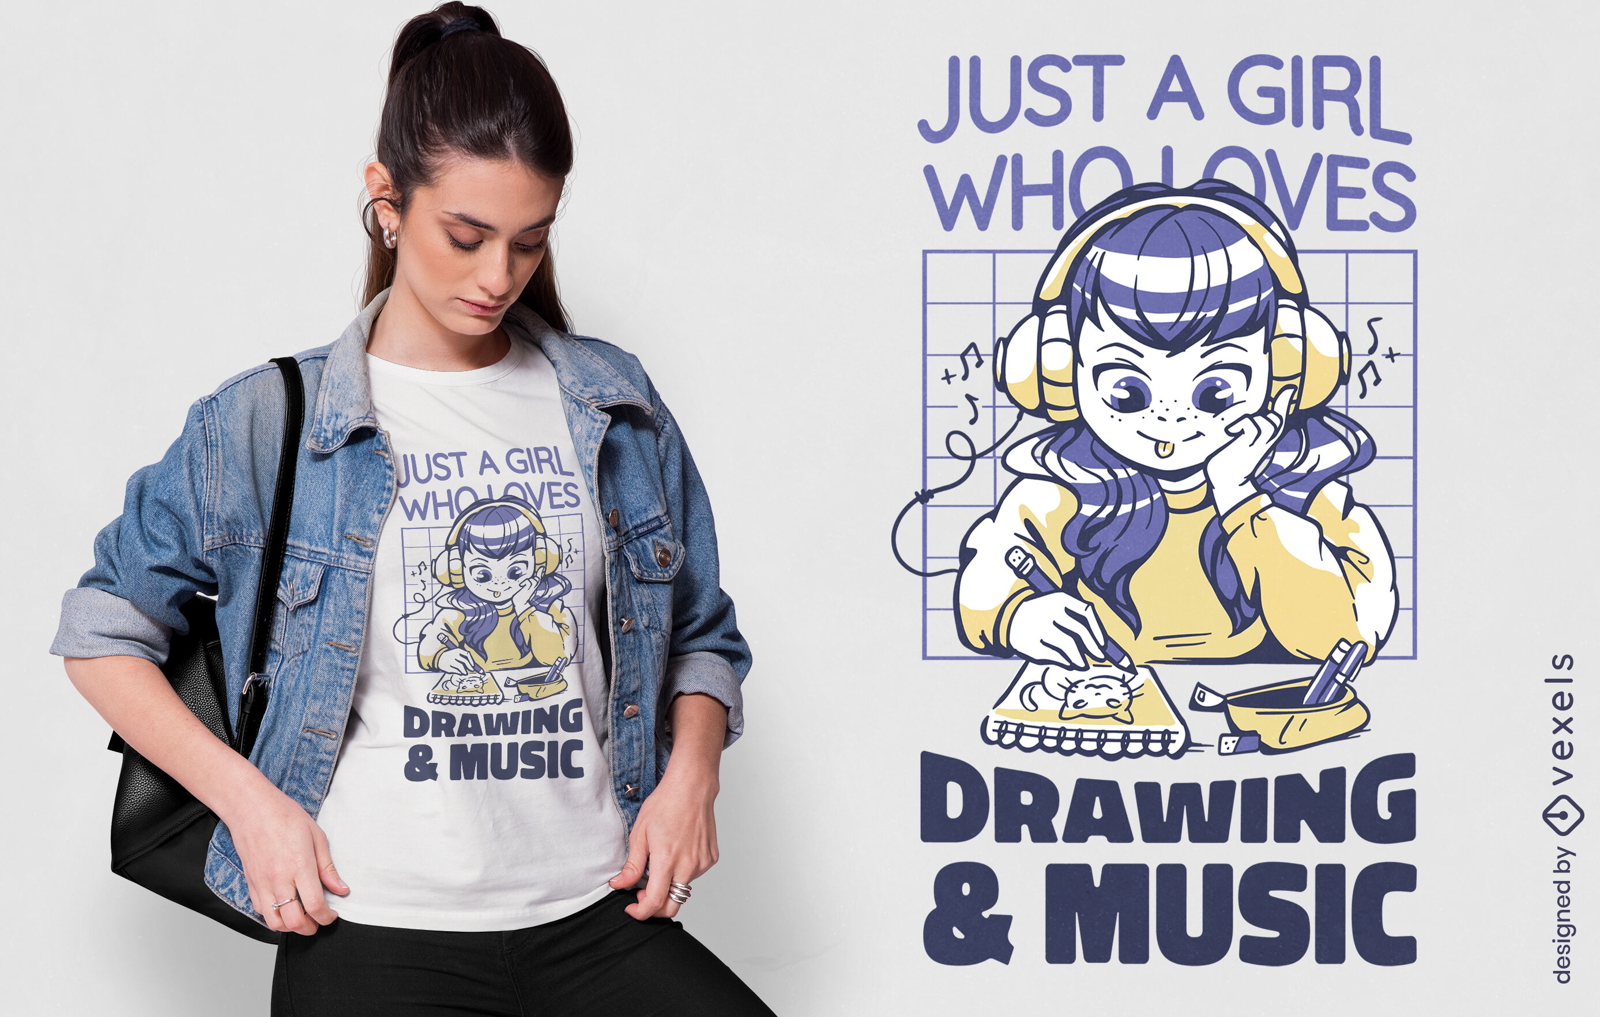 Girl drawing with music t-shirt design